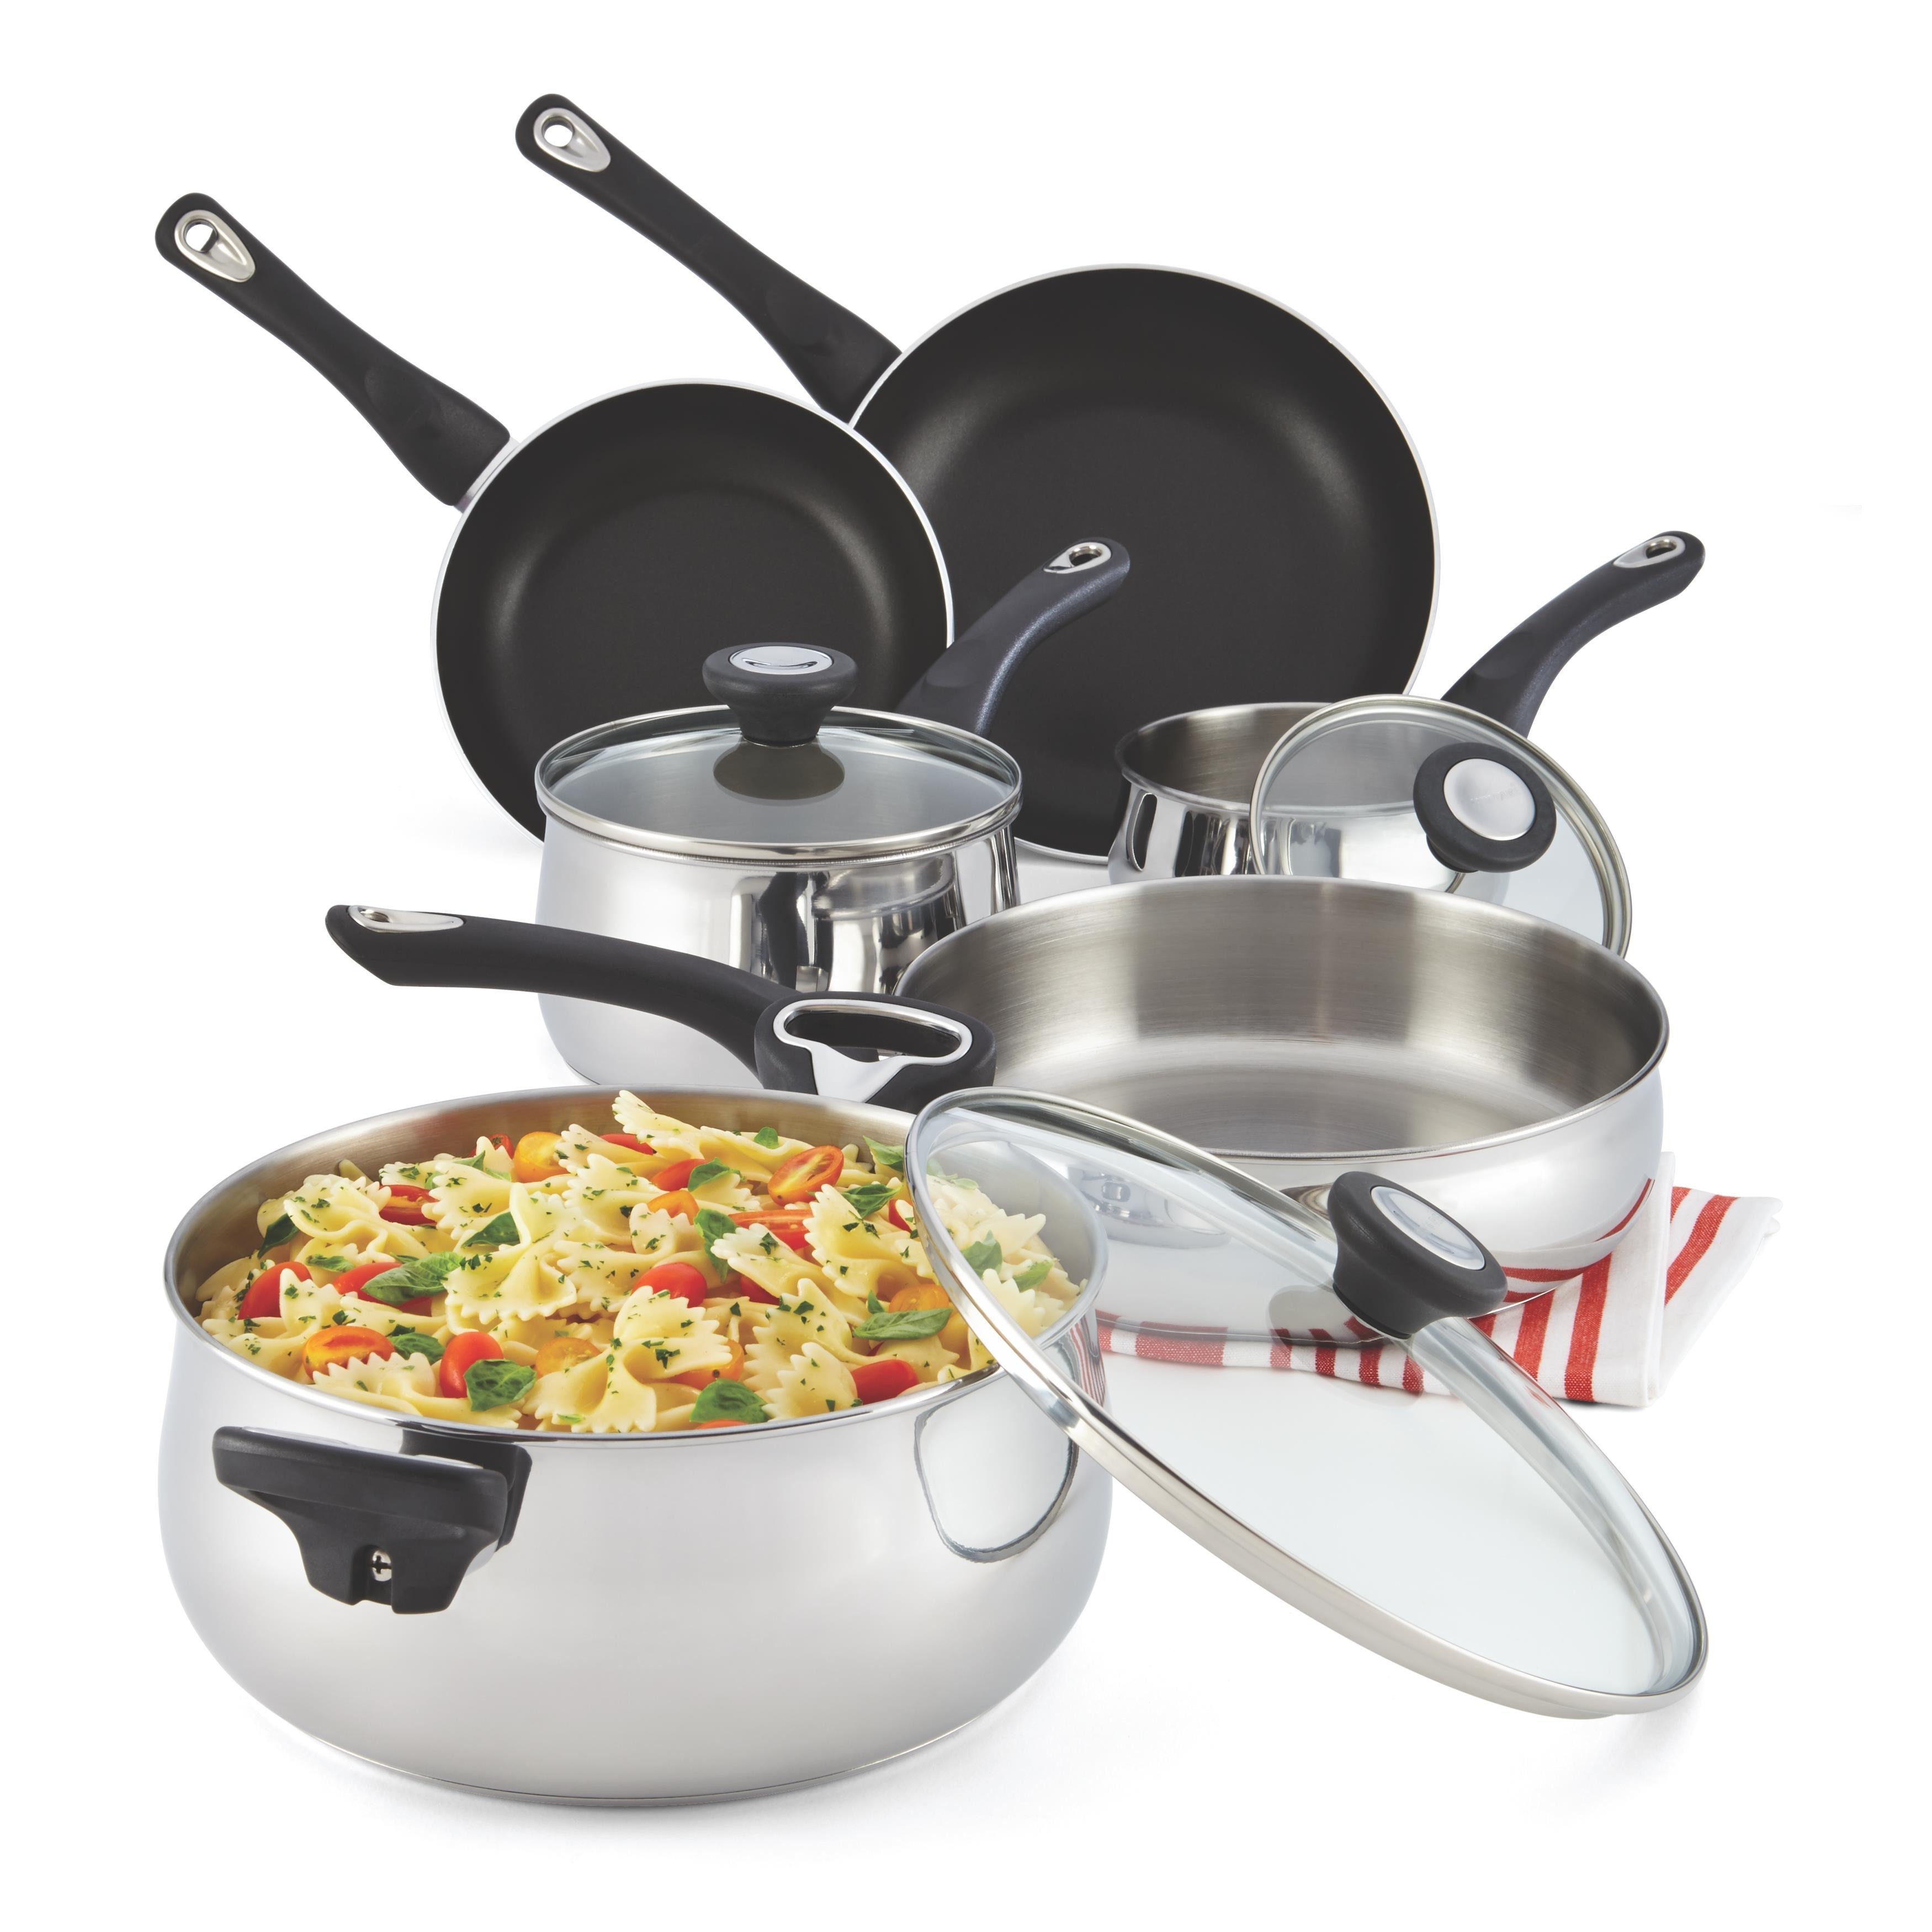 https://ak1.ostkcdn.com/images/products/9238561/Farberware-New-Traditions-Stainless-Steel-12-piece-Cookware-Set-13e04909-519c-49d9-8a58-3ae7e62f376a.jpg